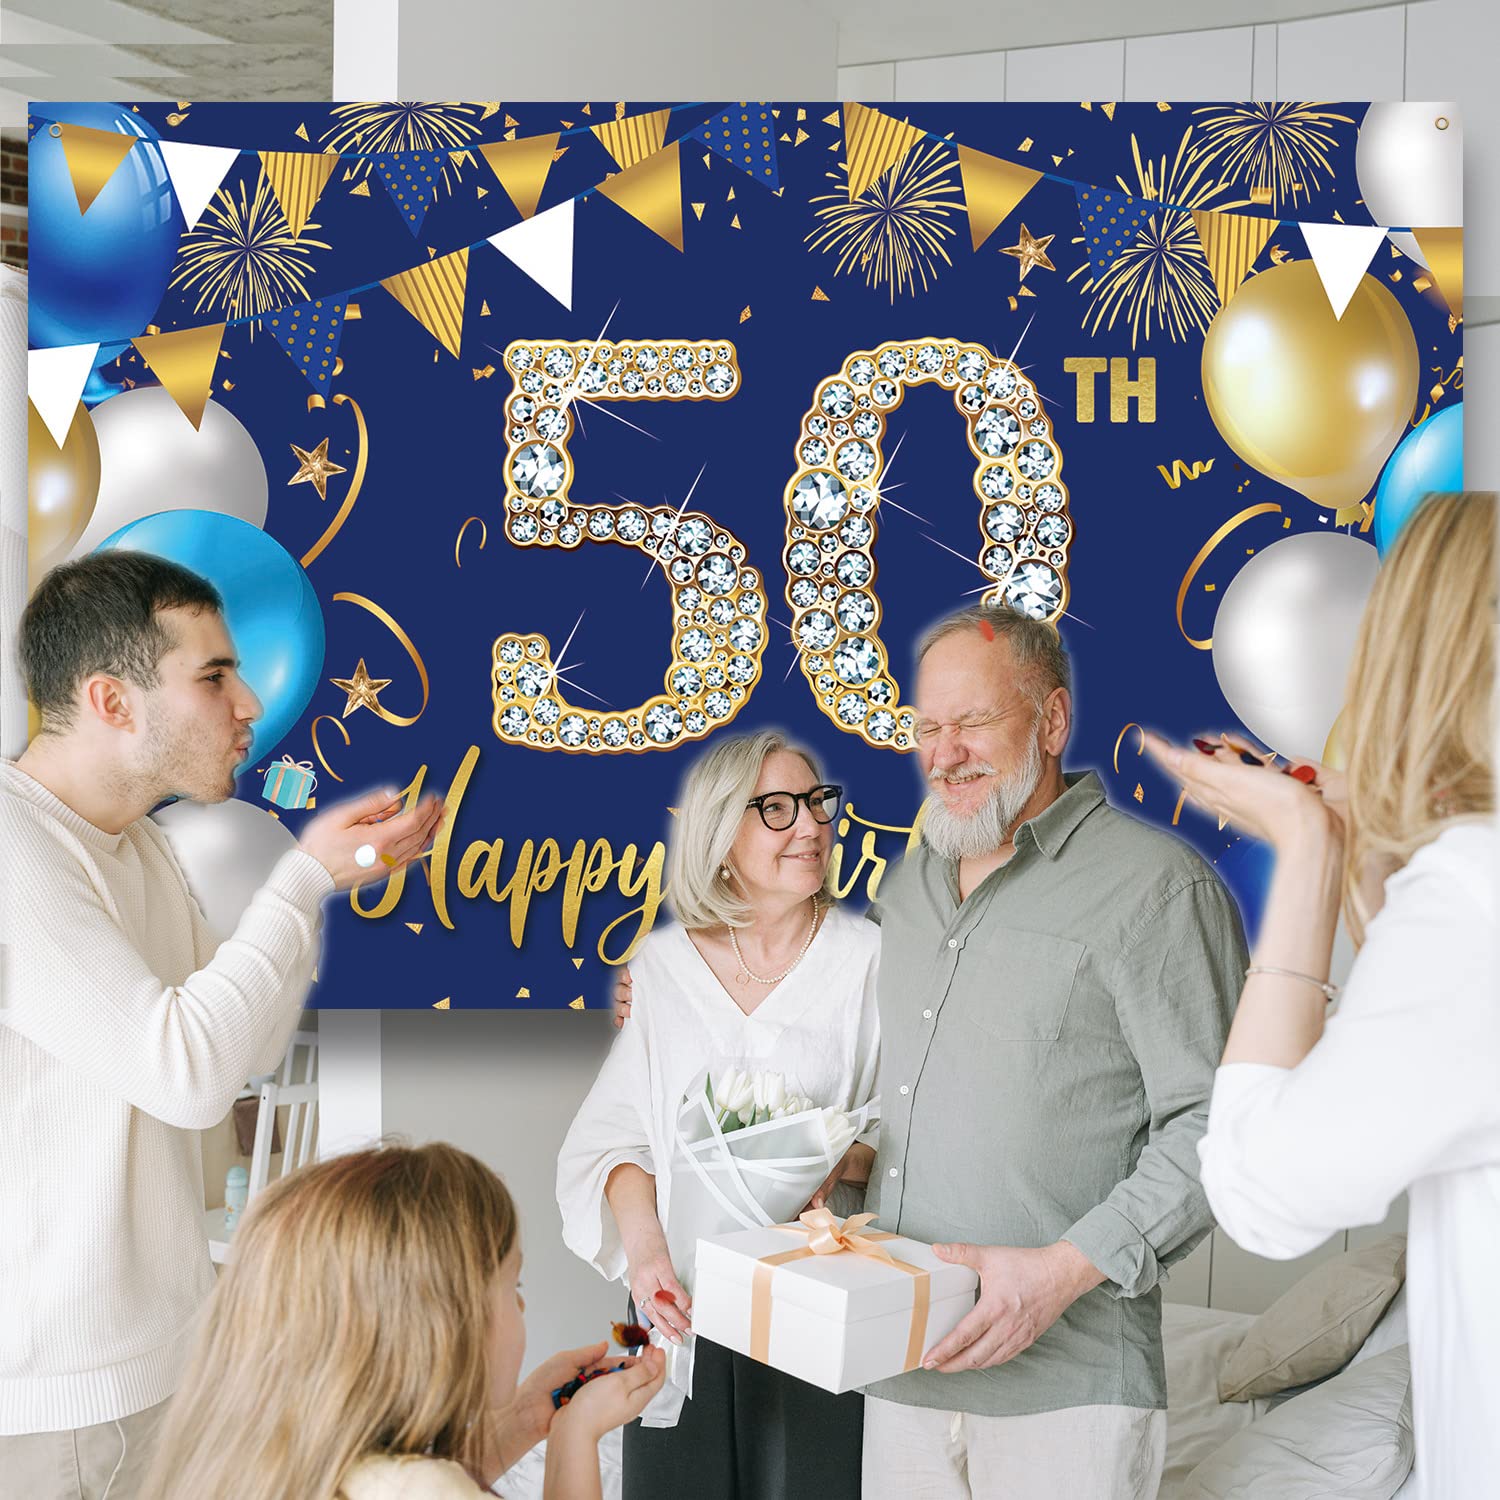 50th Birthday Decorations Backdrop for Men, Happy 50th Birthday Decorations Men, Blue Birthday Photography Background, 50 Year Old Birthday Party Sign Poster Photo Props Fabric 6.1ft x 3.6ft PHXEY